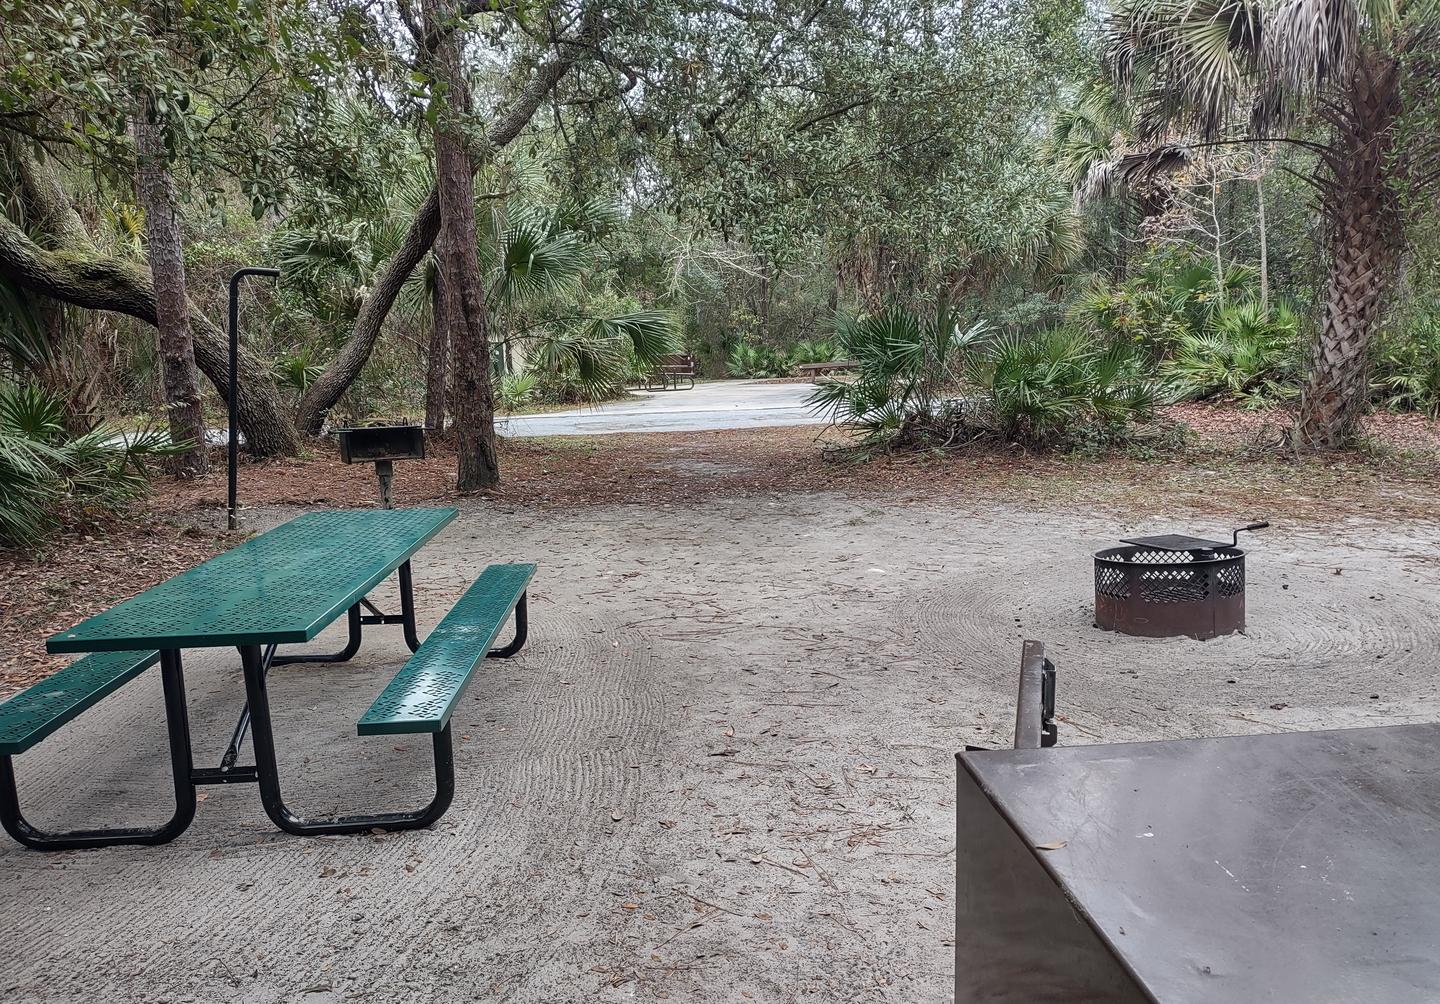 Another view of site 5Amenities pictured: picnic table, fire ring, grill, light pole, bear-proof storage bin